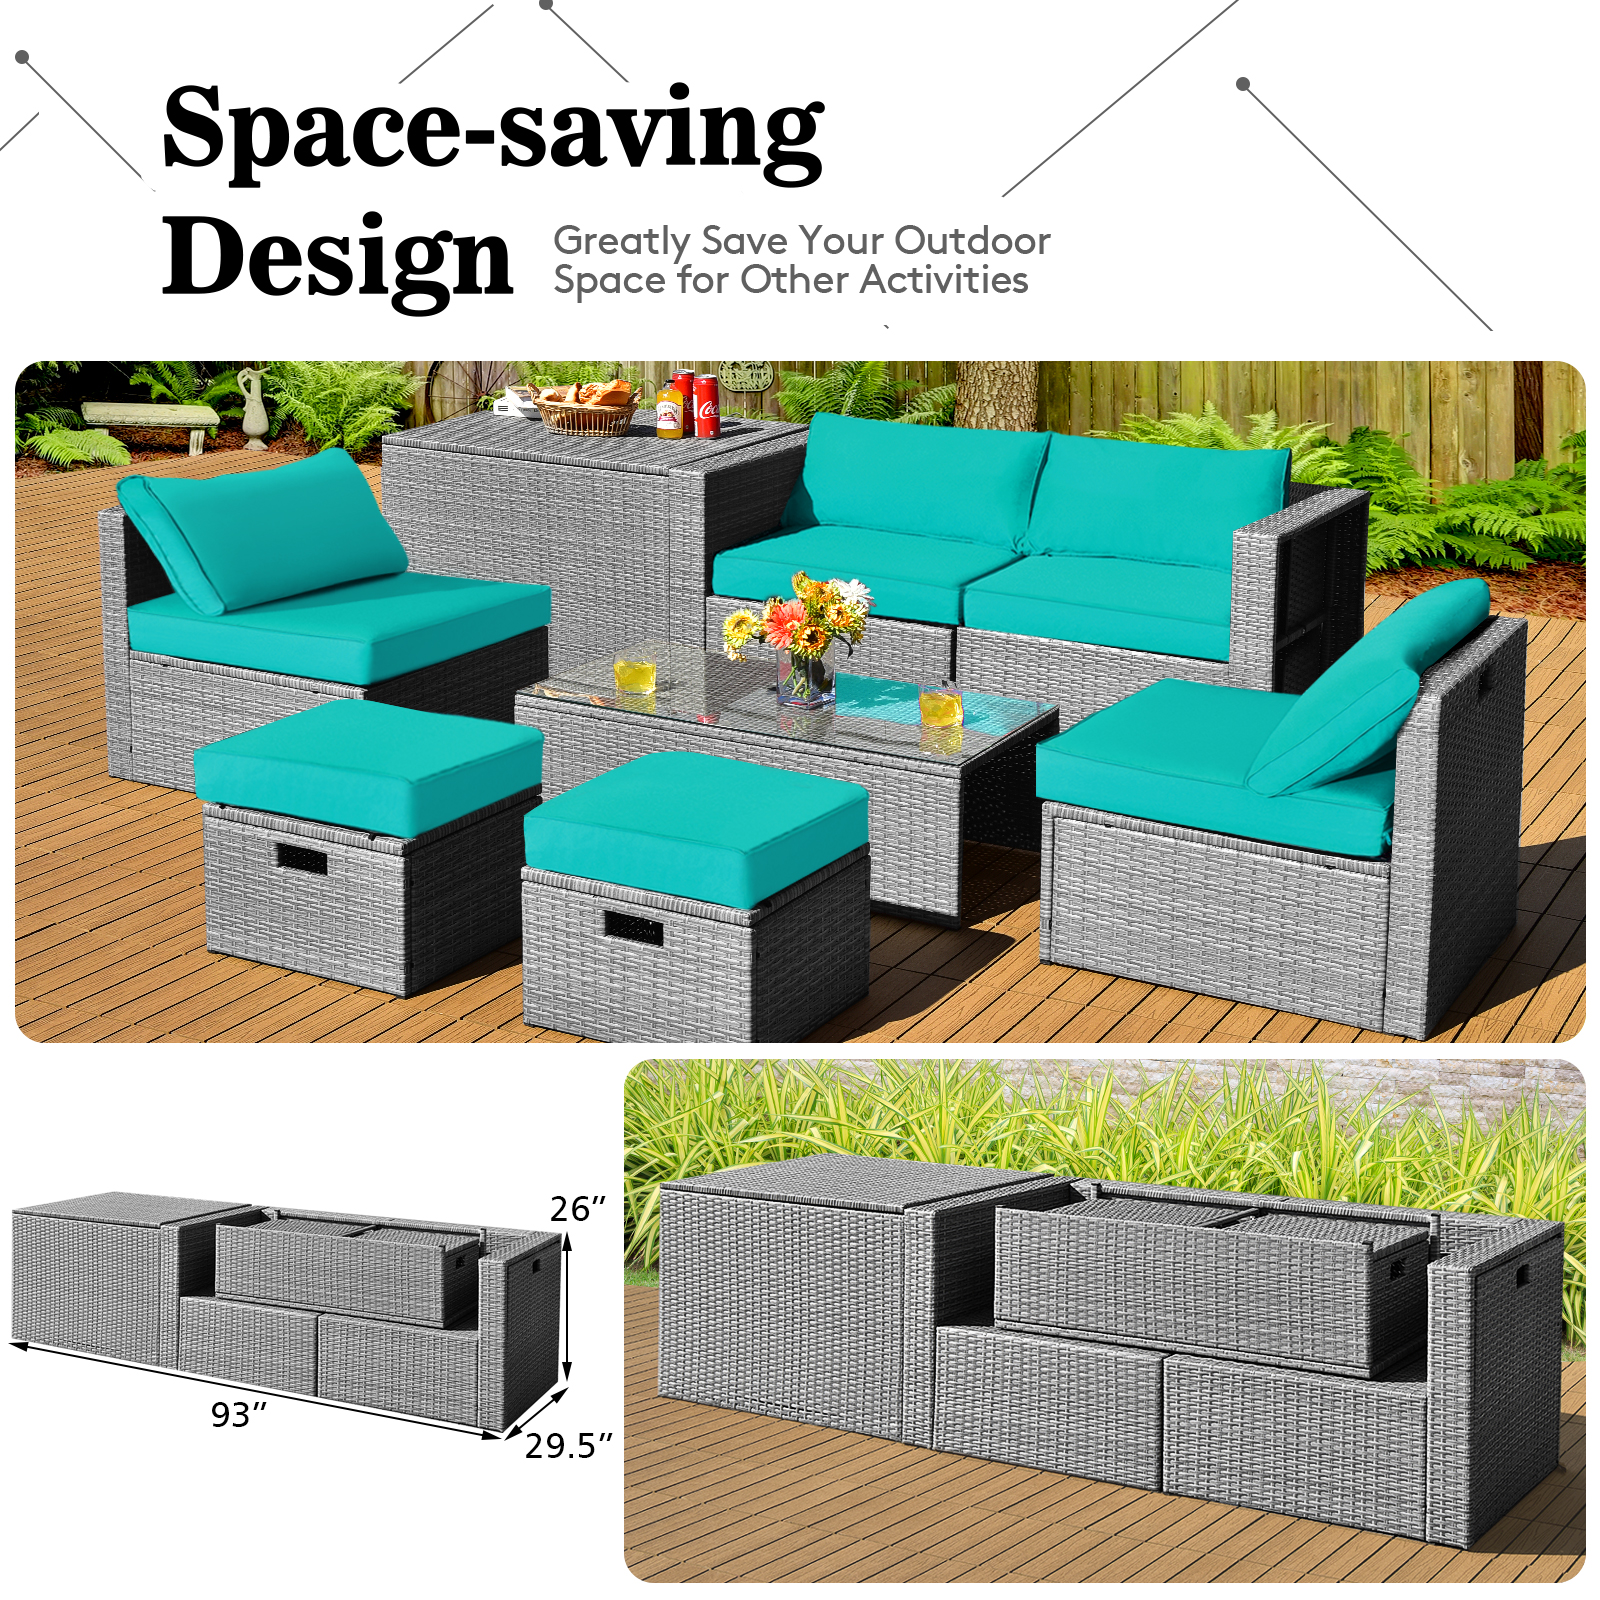 Patiojoy 8 Pieces All-Weather PE Rattan Patio Furniture Set Outdoor Space-Saving Sectional Sofa Set with Storage Box Turquoise - image 5 of 9